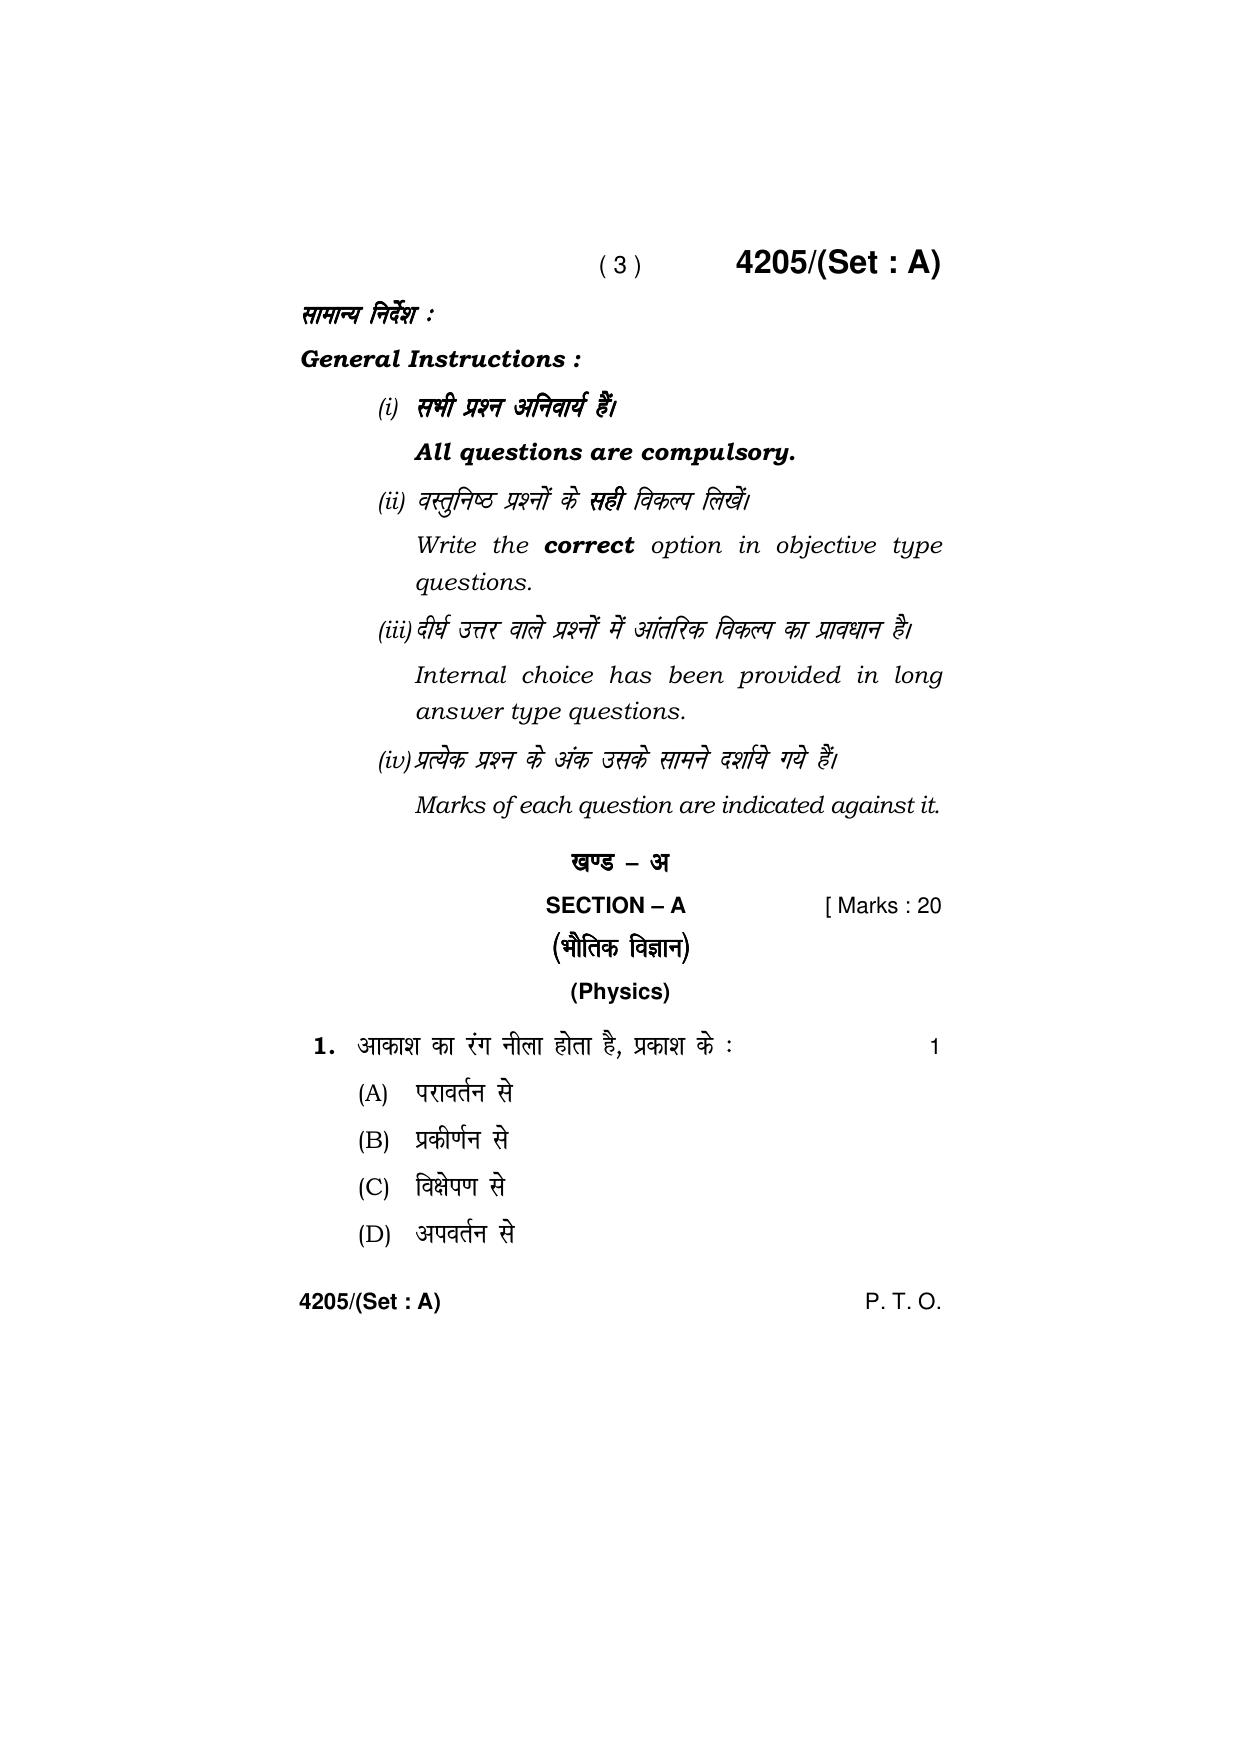 Haryana Board HBSE Class 10 Science (All Set) 2019 Question Paper - Page 3